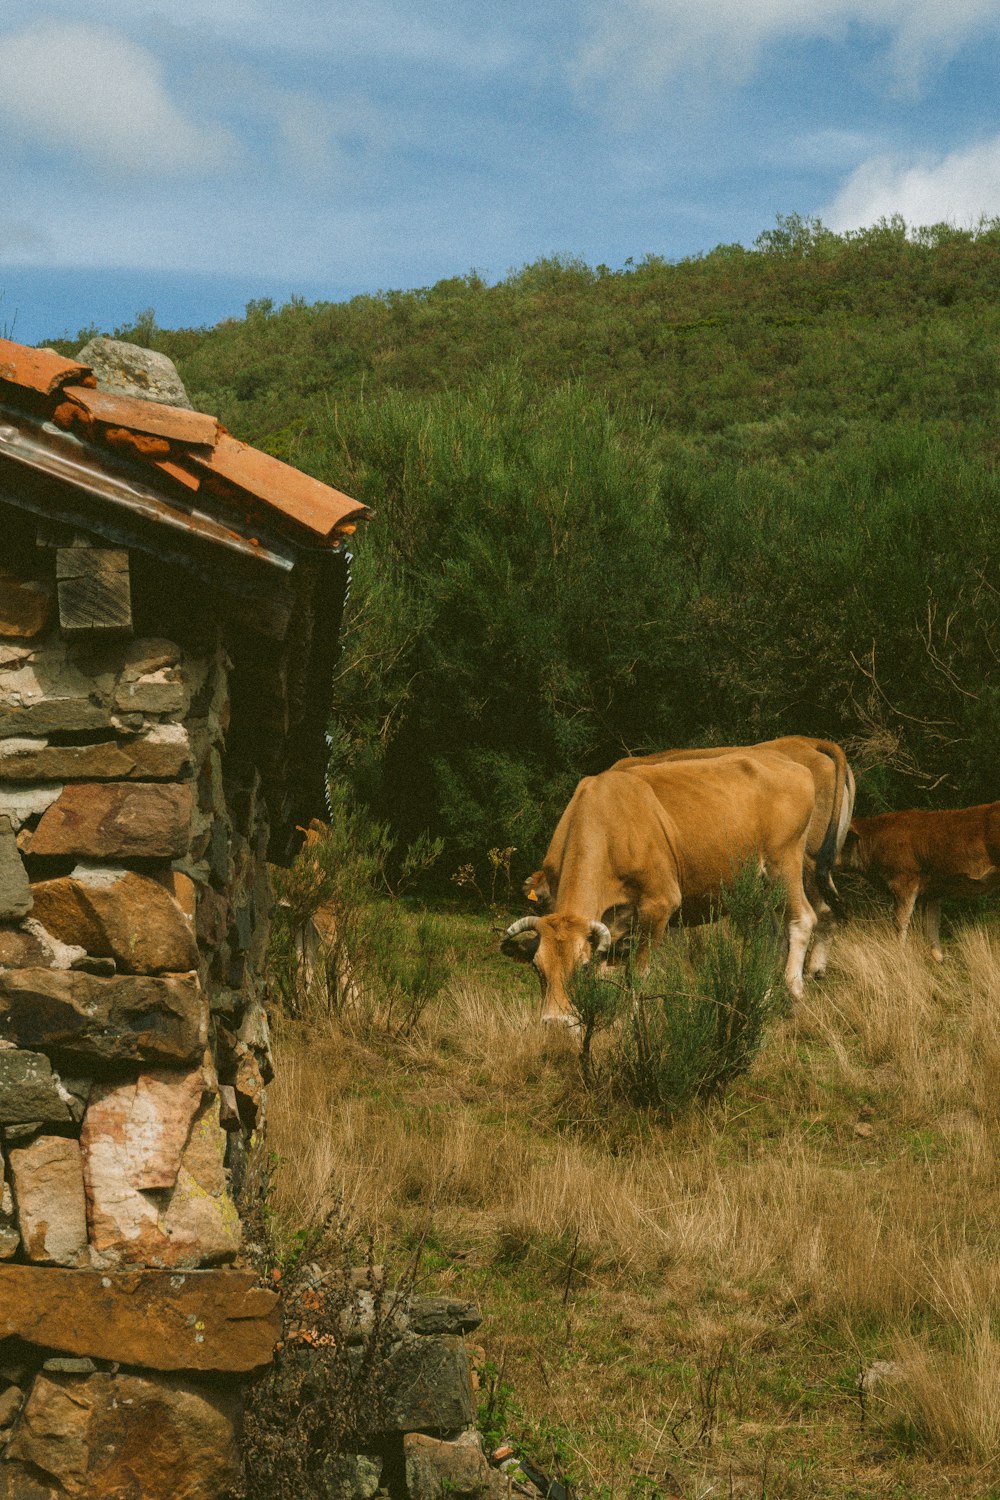 two cows grazing in a field next to a stone building